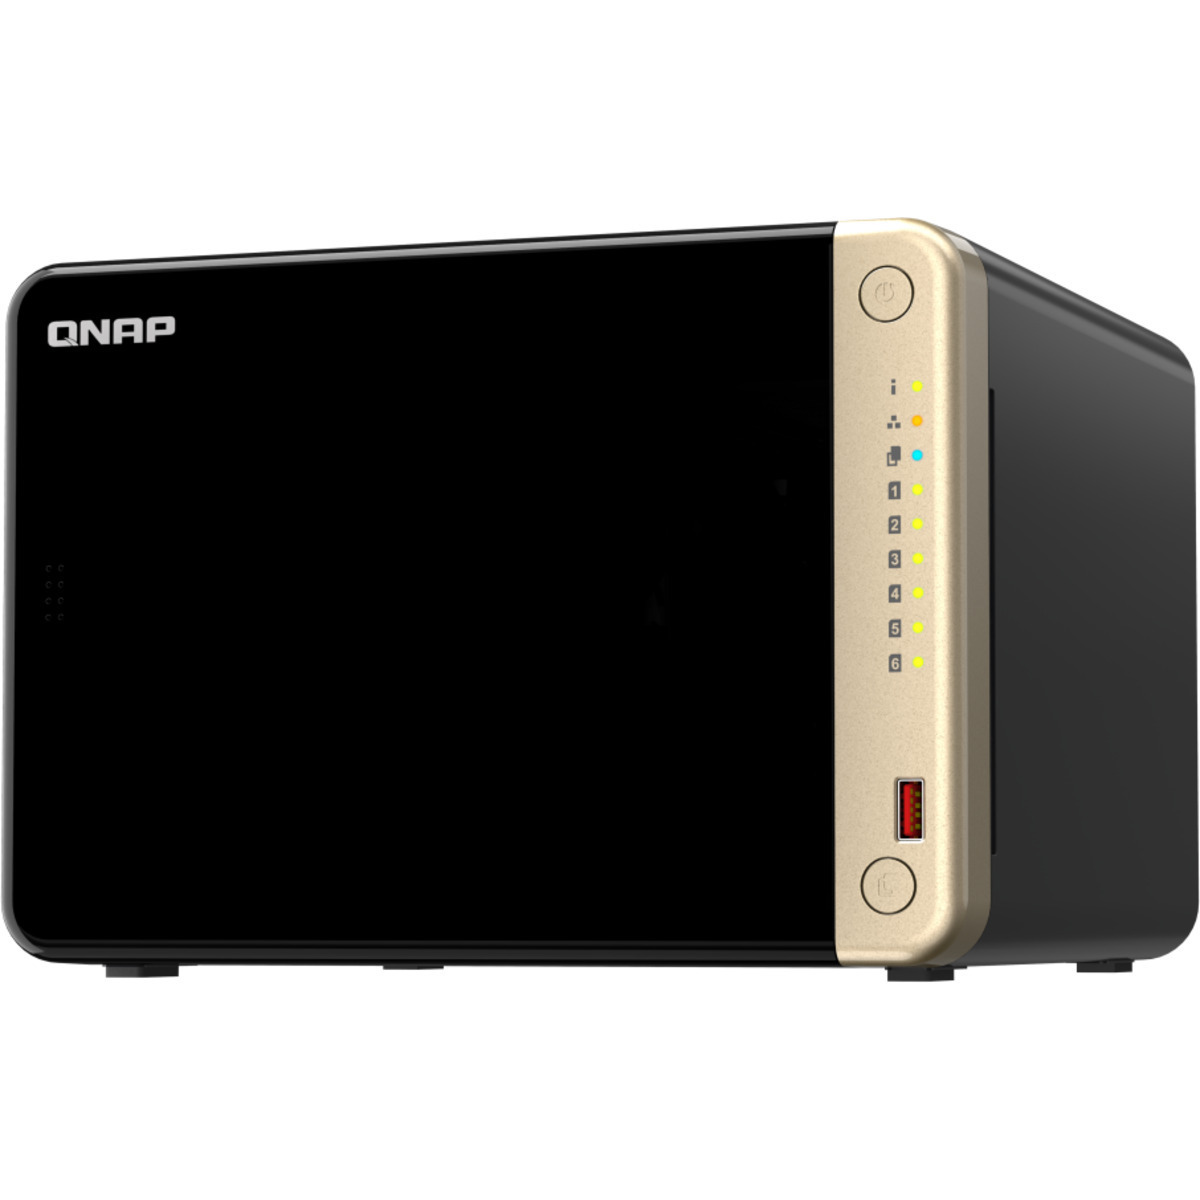 QNAP TS-664 4tb 6-Bay Desktop Multimedia / Power User / Business NAS - Network Attached Storage Device 4x1tb Sandisk Ultra 3D SDSSDH3-1T00 2.5 560/520MB/s SATA 6Gb/s SSD CONSUMER Class Drives Installed - Burn-In Tested TS-664